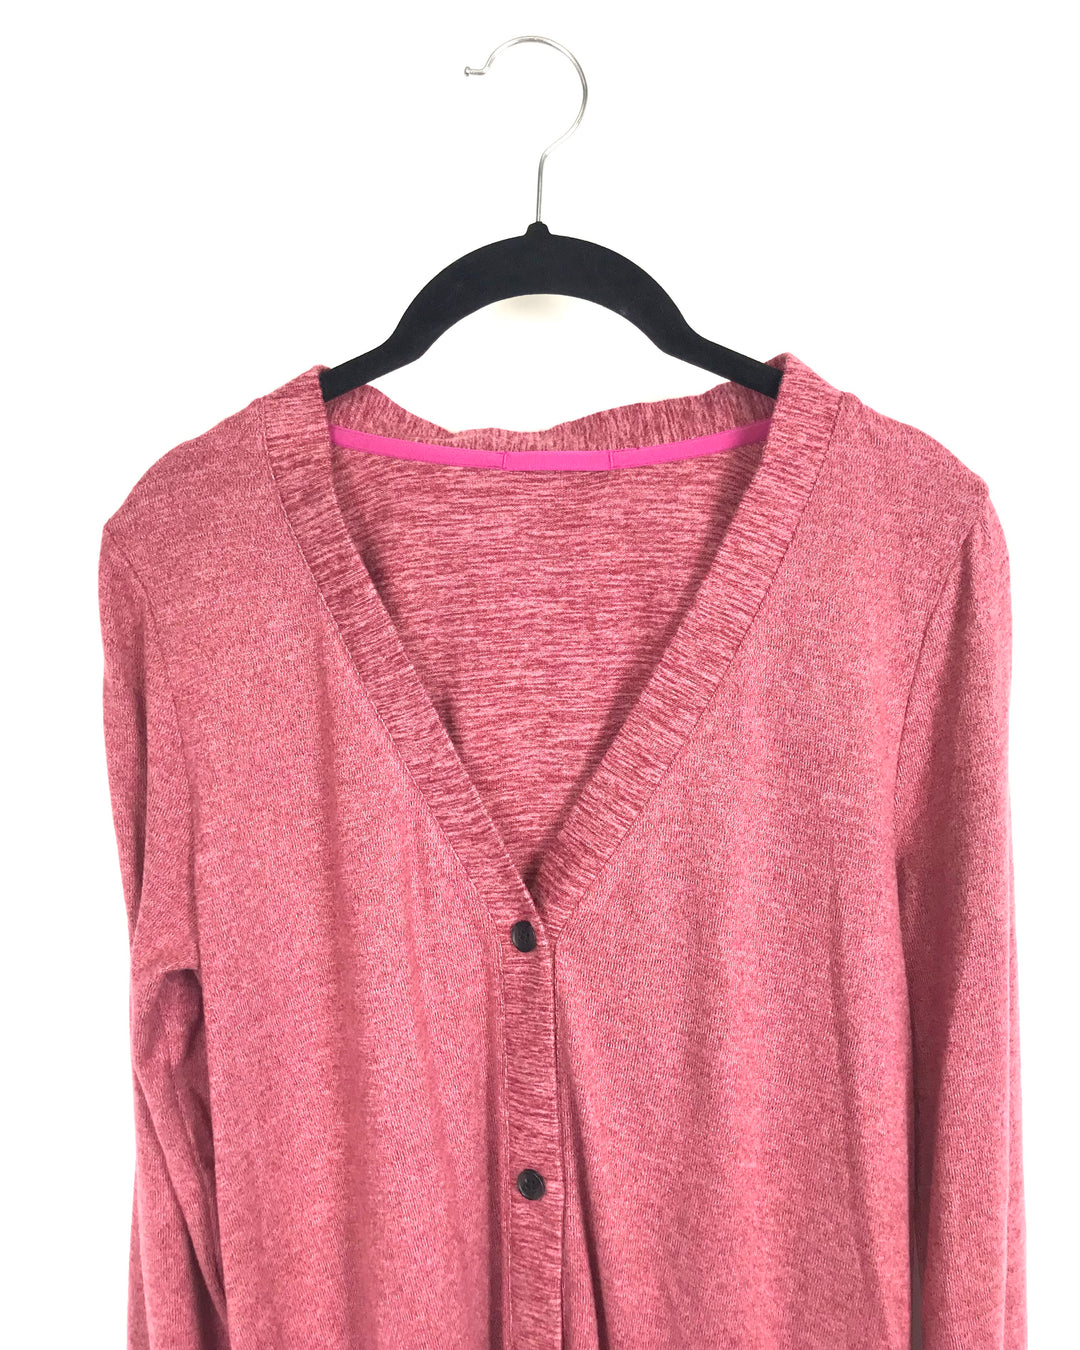 Long Dusty Pink Cardigan - Small